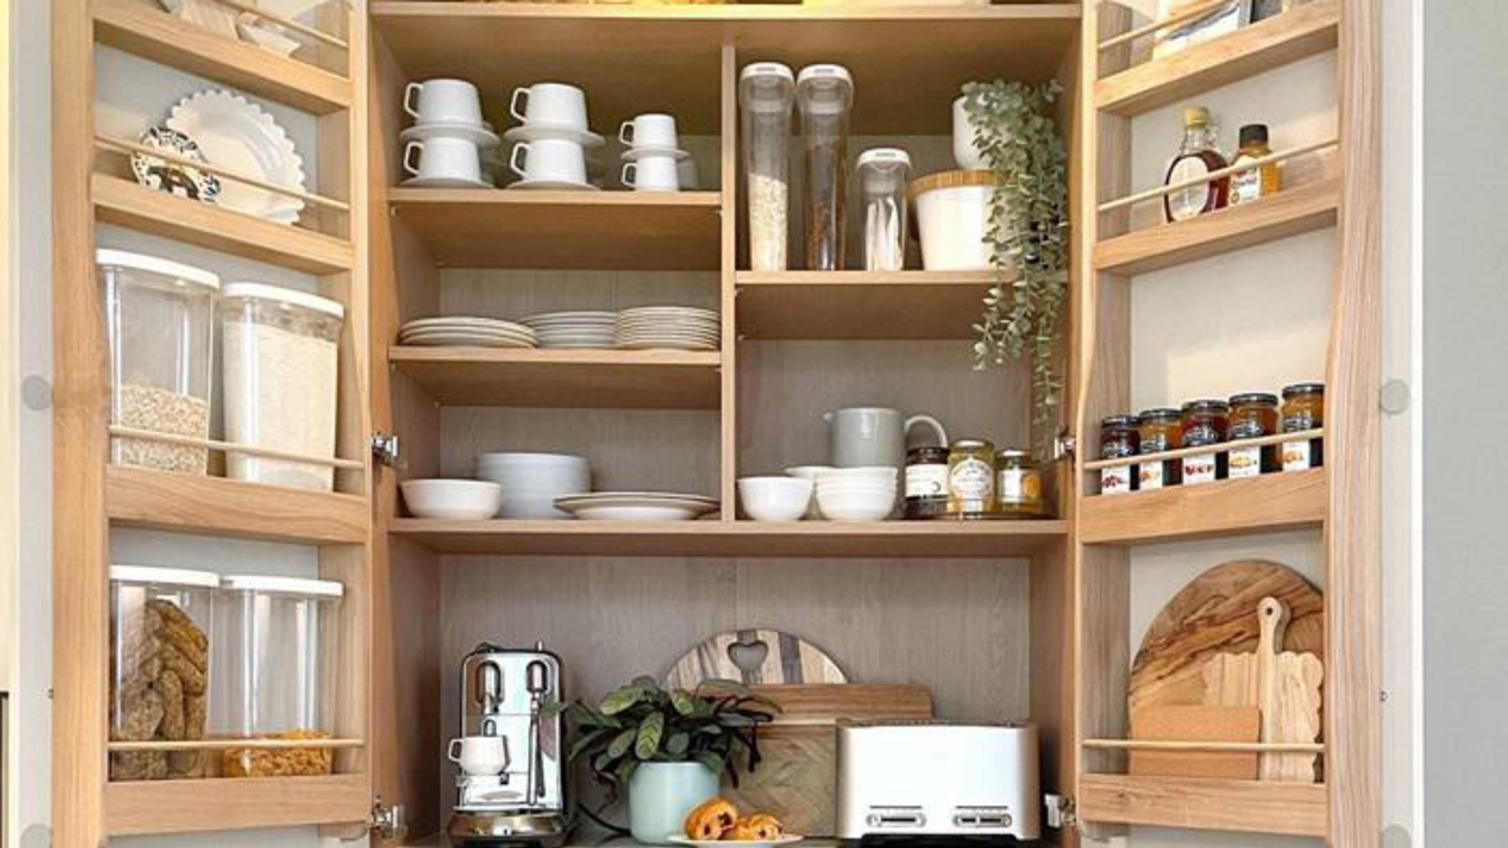 Larder cabinet in a small shaker kitchen, fitted with wood-effect accessories inside to organise storage.